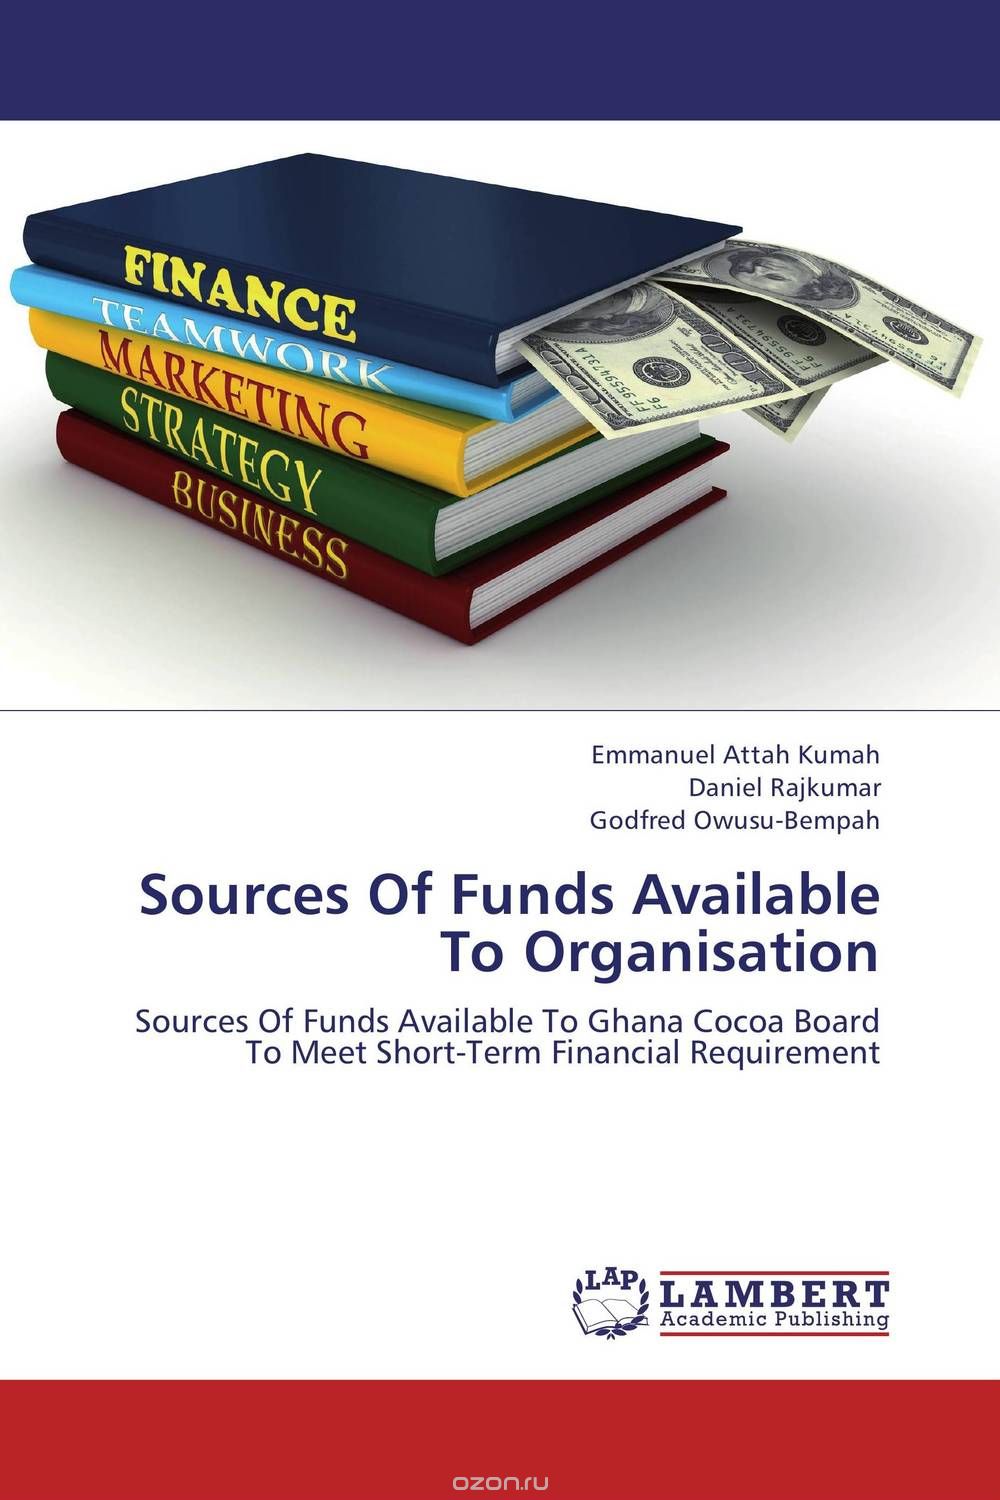 Скачать книгу "Sources Of Funds Available To Organisation"